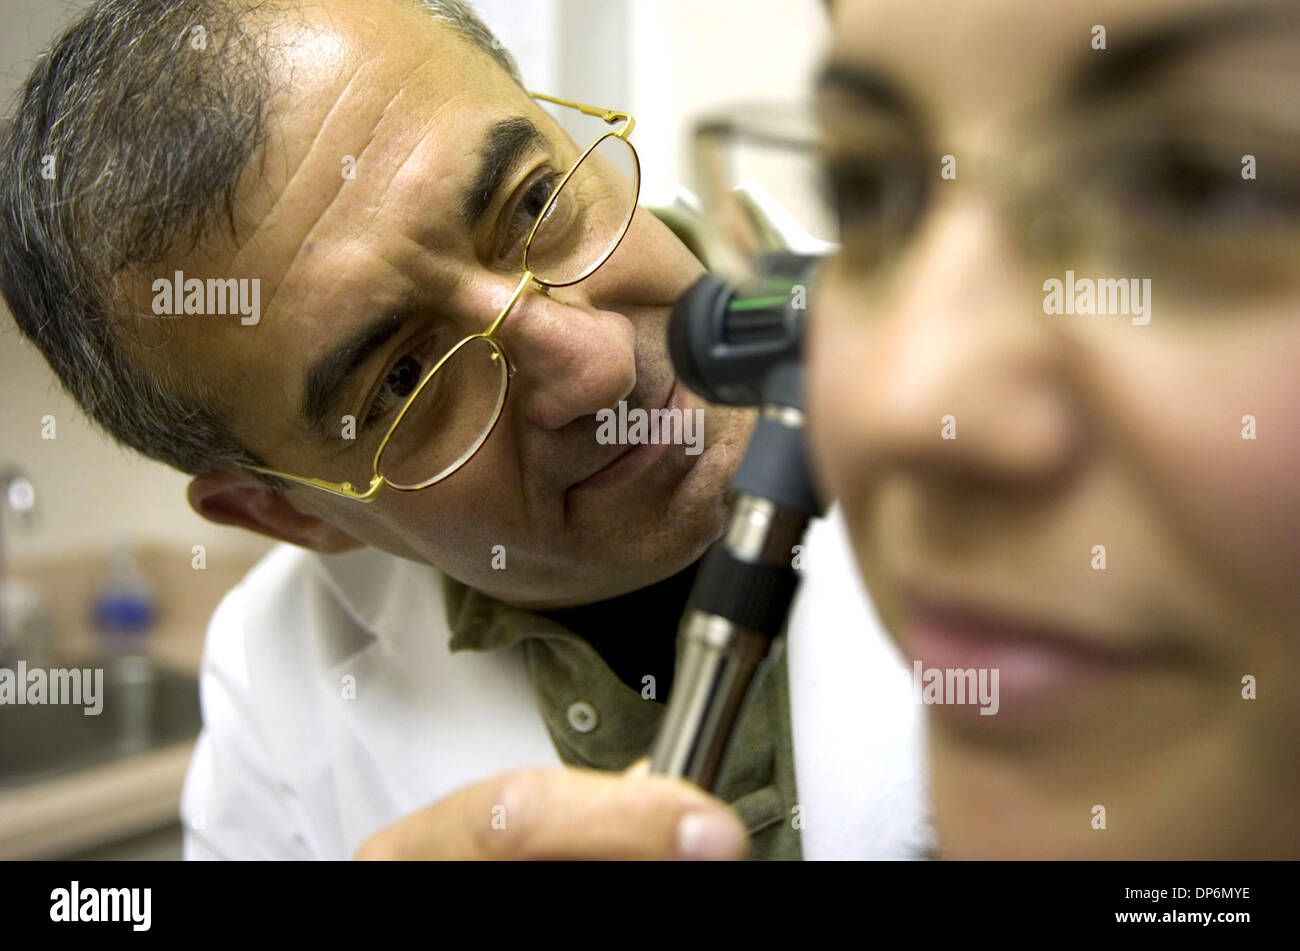 SECONDARY COVER /// Dr. Douglas Everett DeSalles, left, examines patient  Erin MCIKinney Sunday, December 31, 2006 at a local medical office. When  not treating patients, DeSalles, as Doug Everette, hosts Radio Parallax,